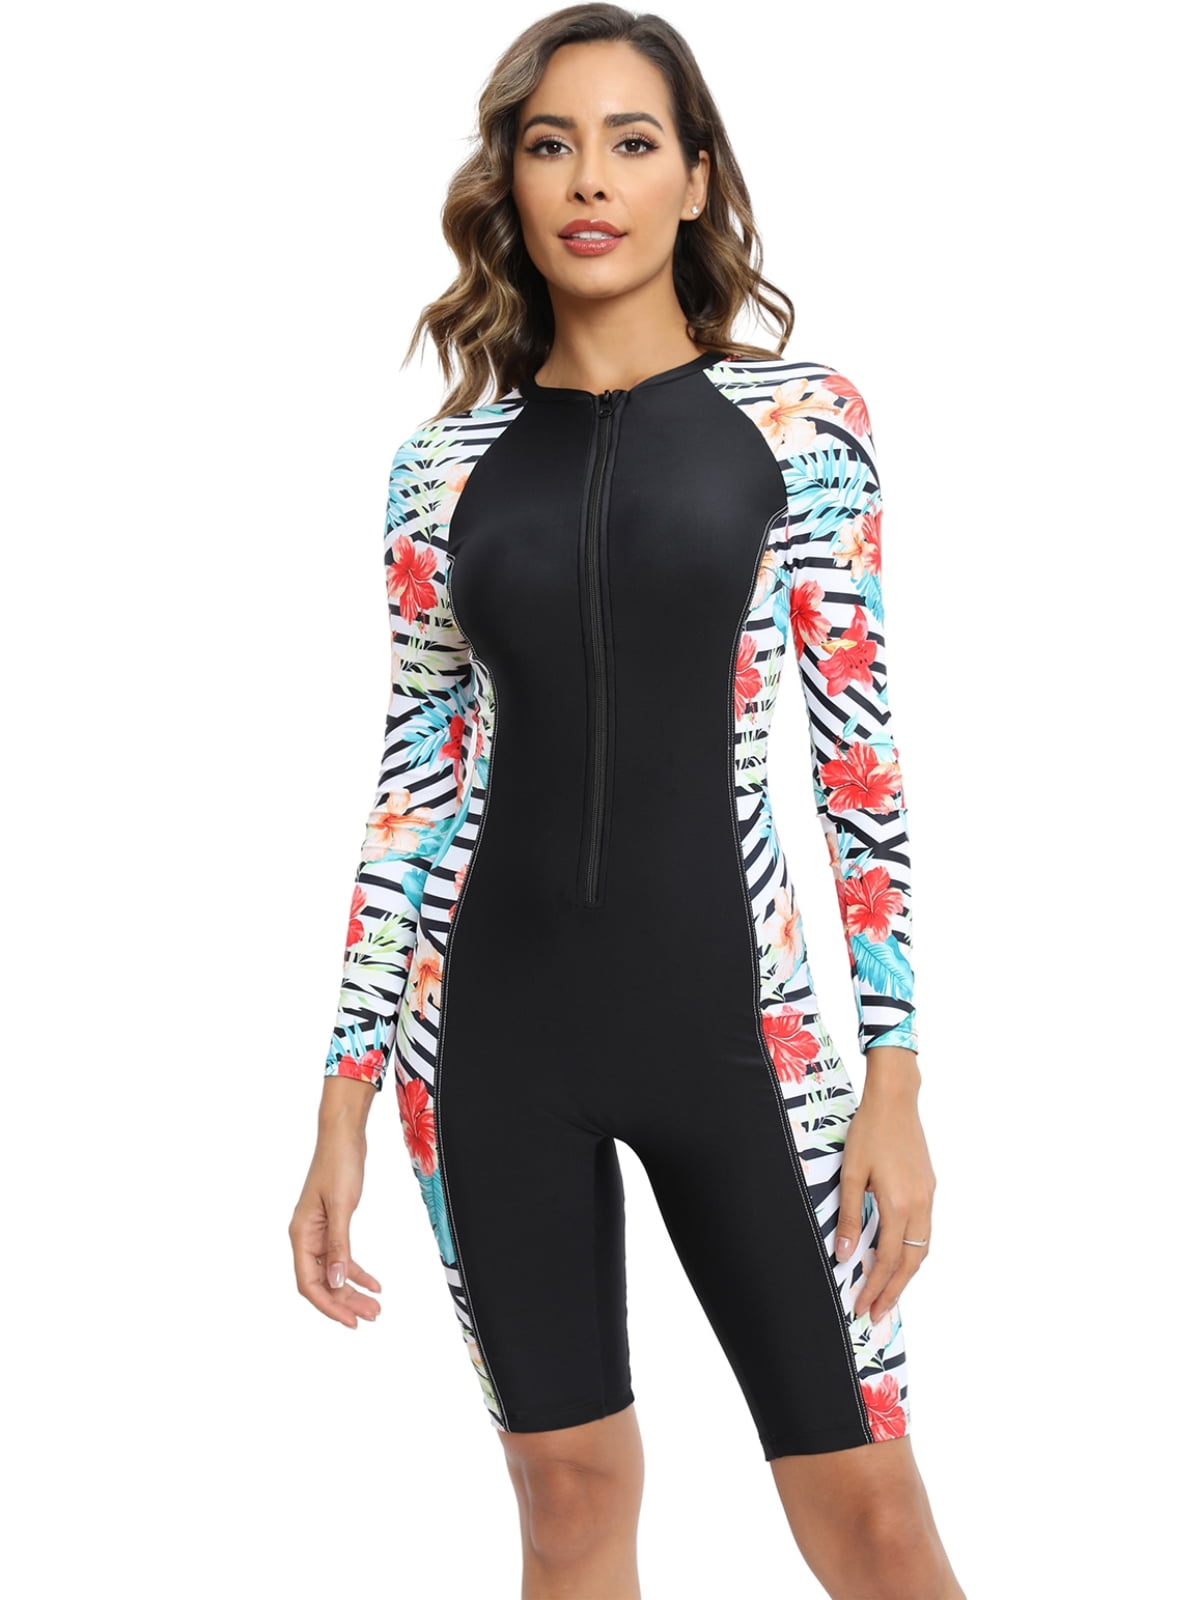 WBQ Wetsuit for Women Long Sleeve Shorty Wet suit Diving Suits with ...